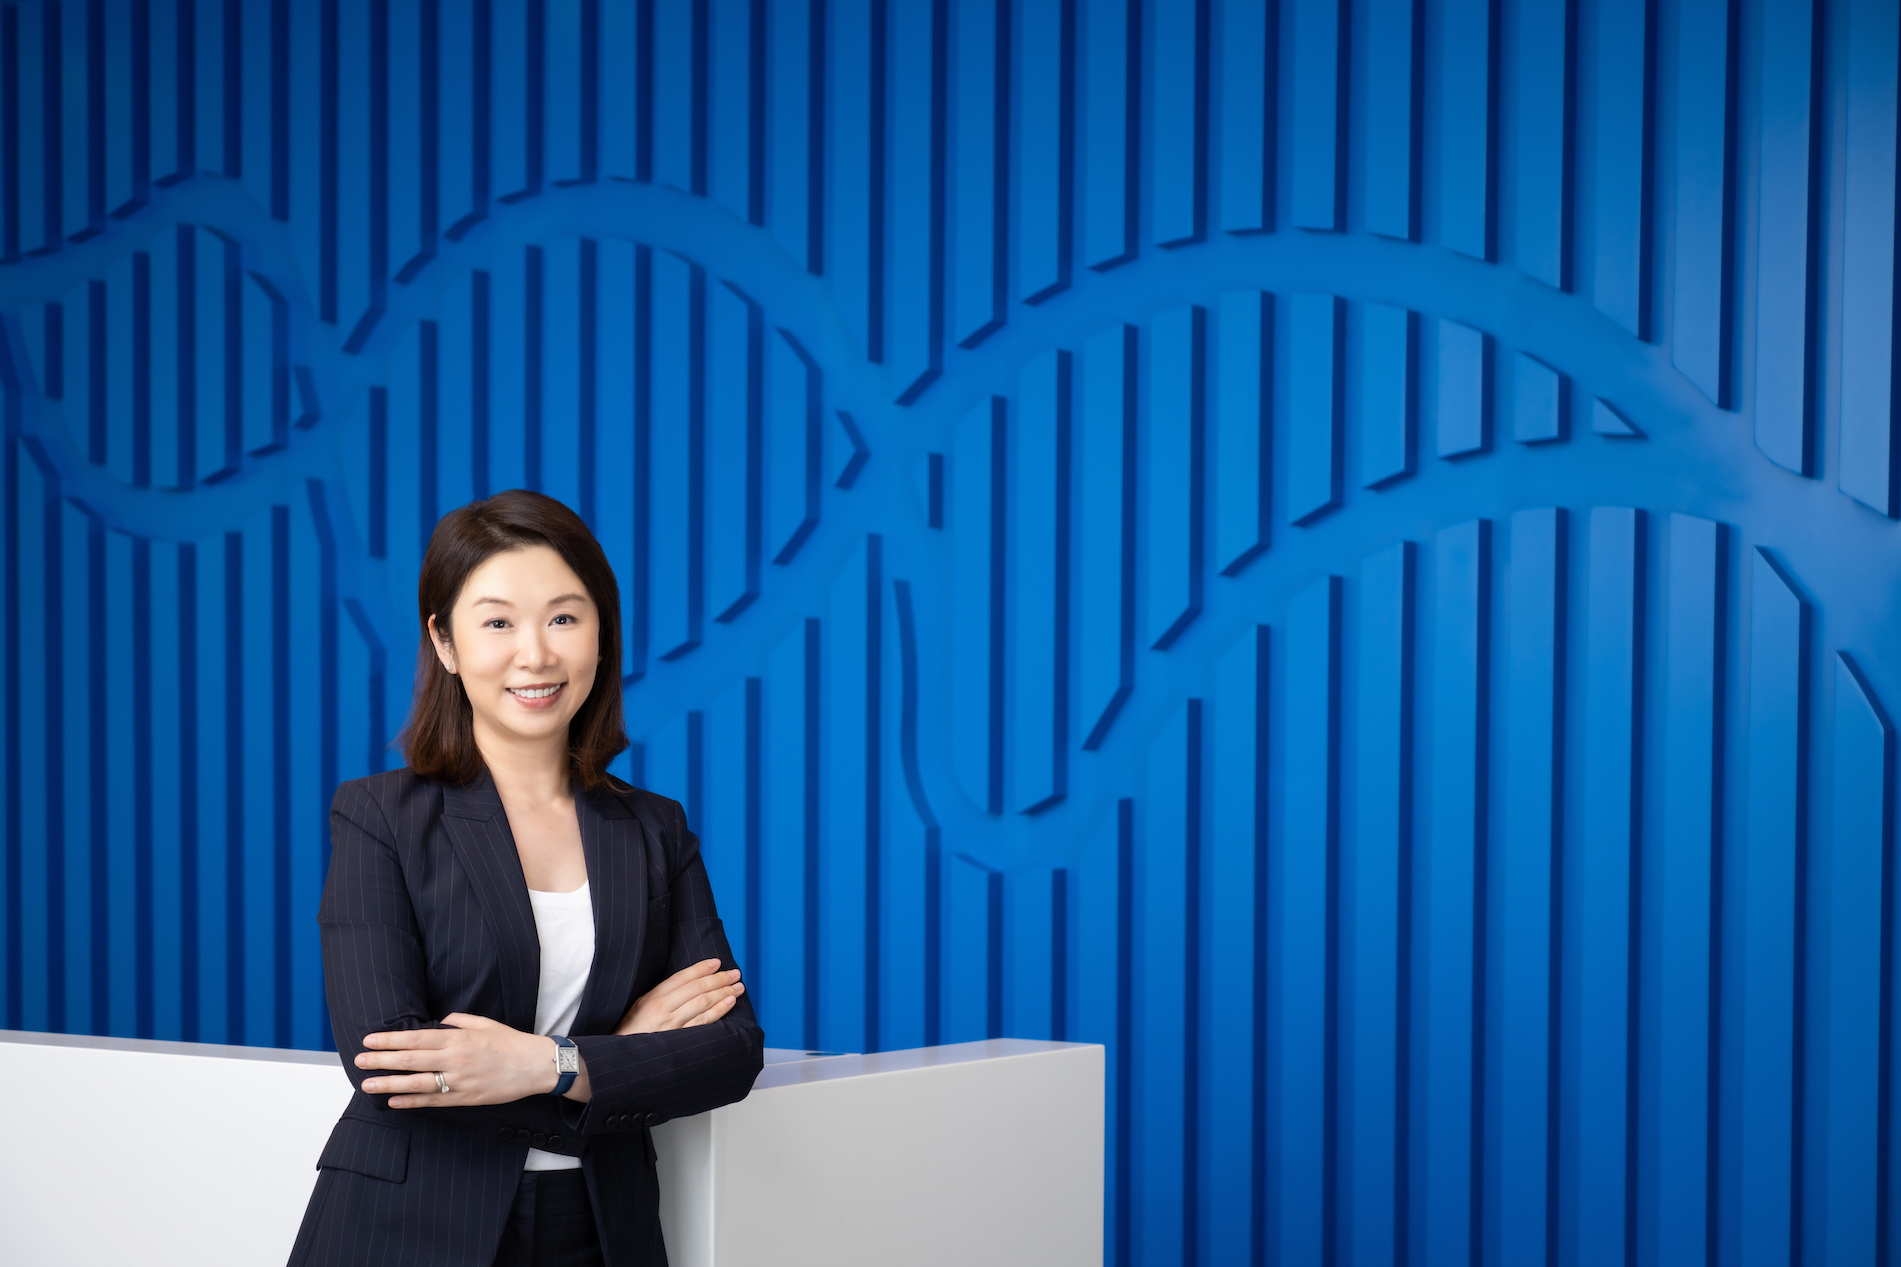 “Amgen Hong Kong is proud to be an active supporter of the project for its predict and prevent nature”, says Kara Cheung, General Manager of Amgen Hong Kong and Macau.